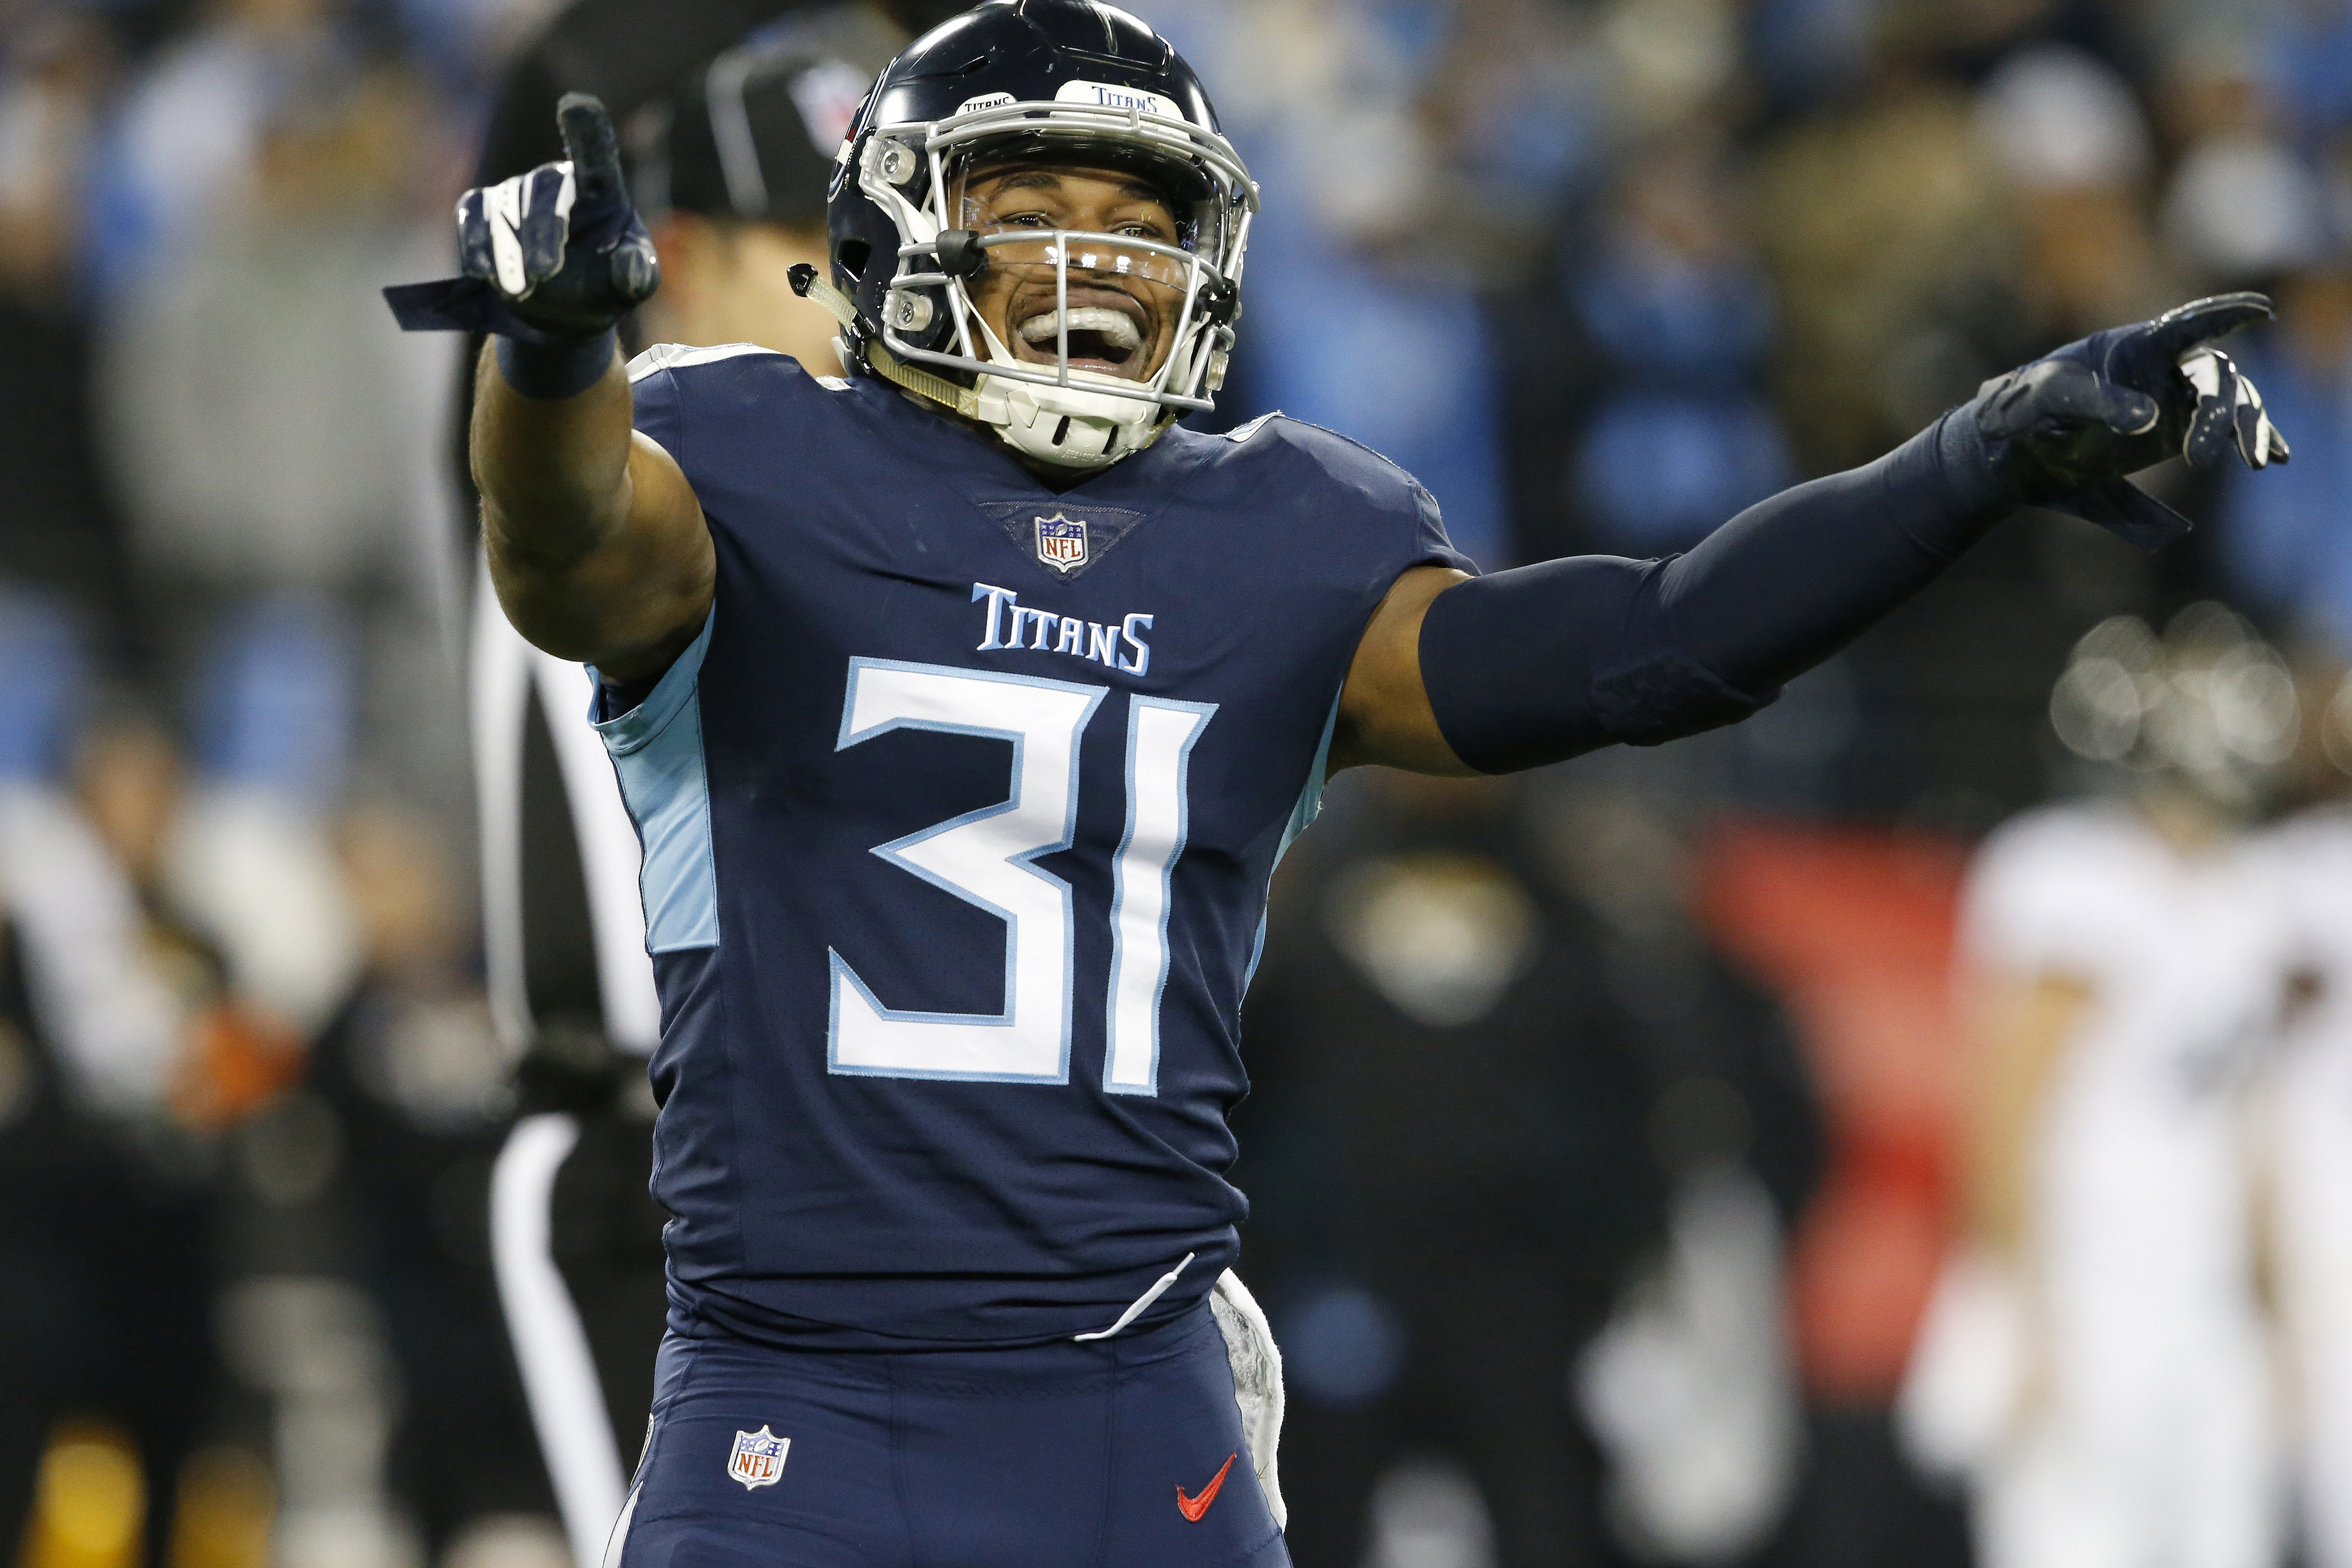 Titans can rest up after winning 2 of 3 games in 11-day span